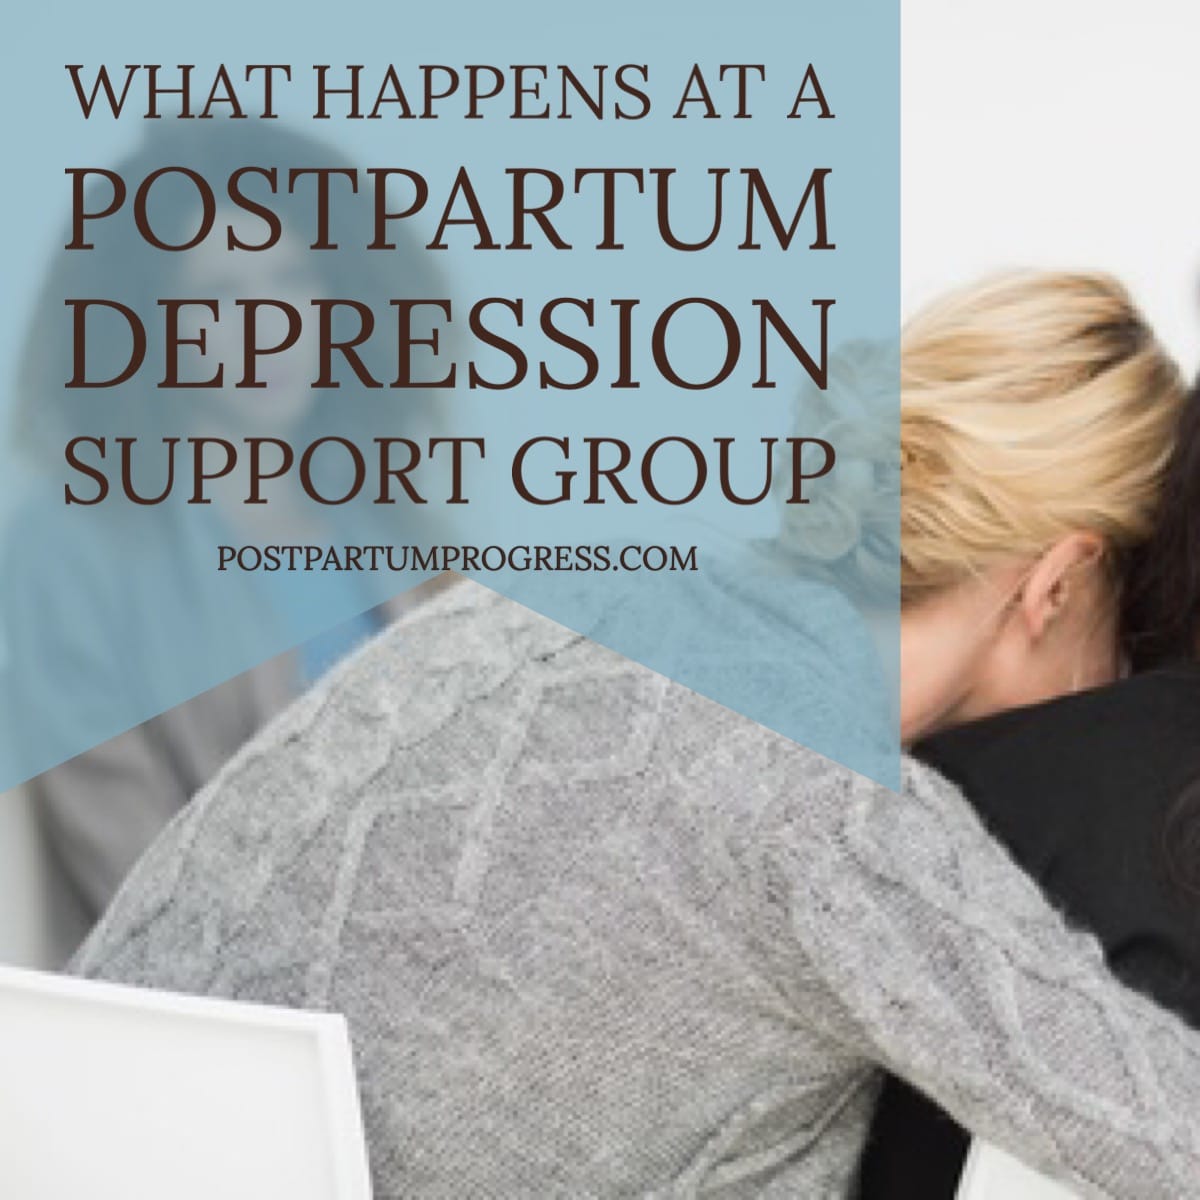 What Happens at a Postpartum Depression Support Group